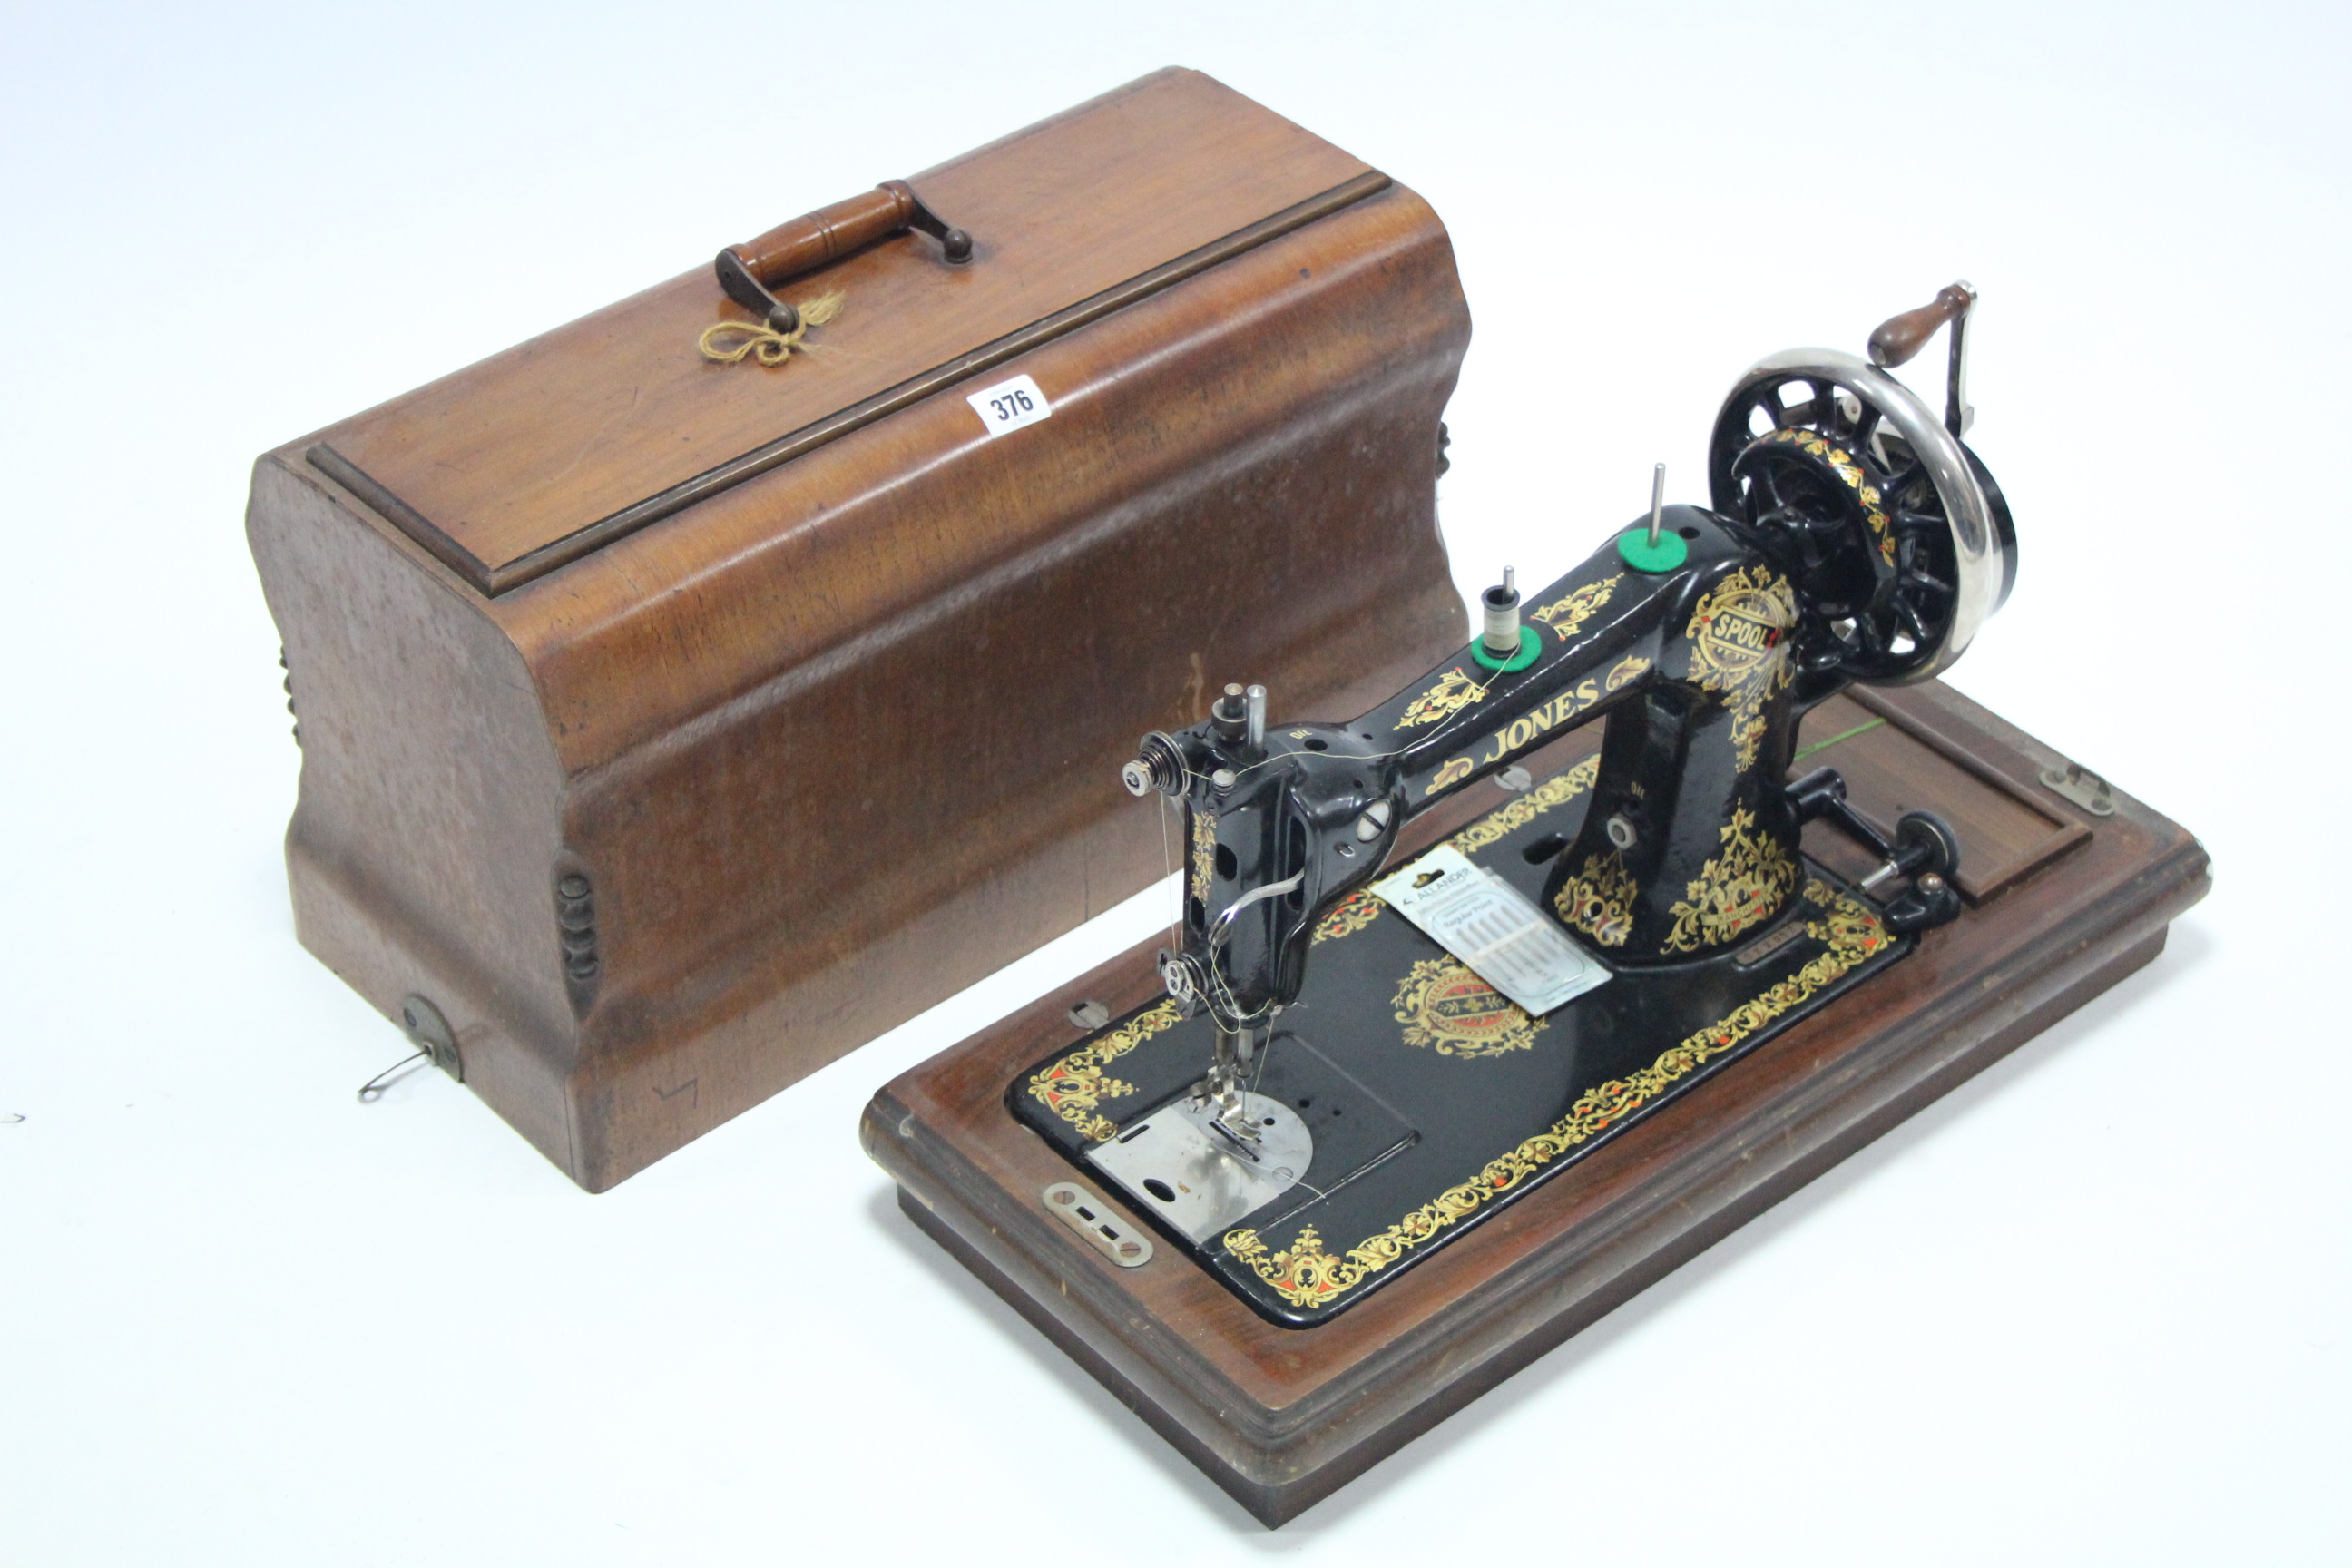 A Jones hand sewing machine with mahogany case.